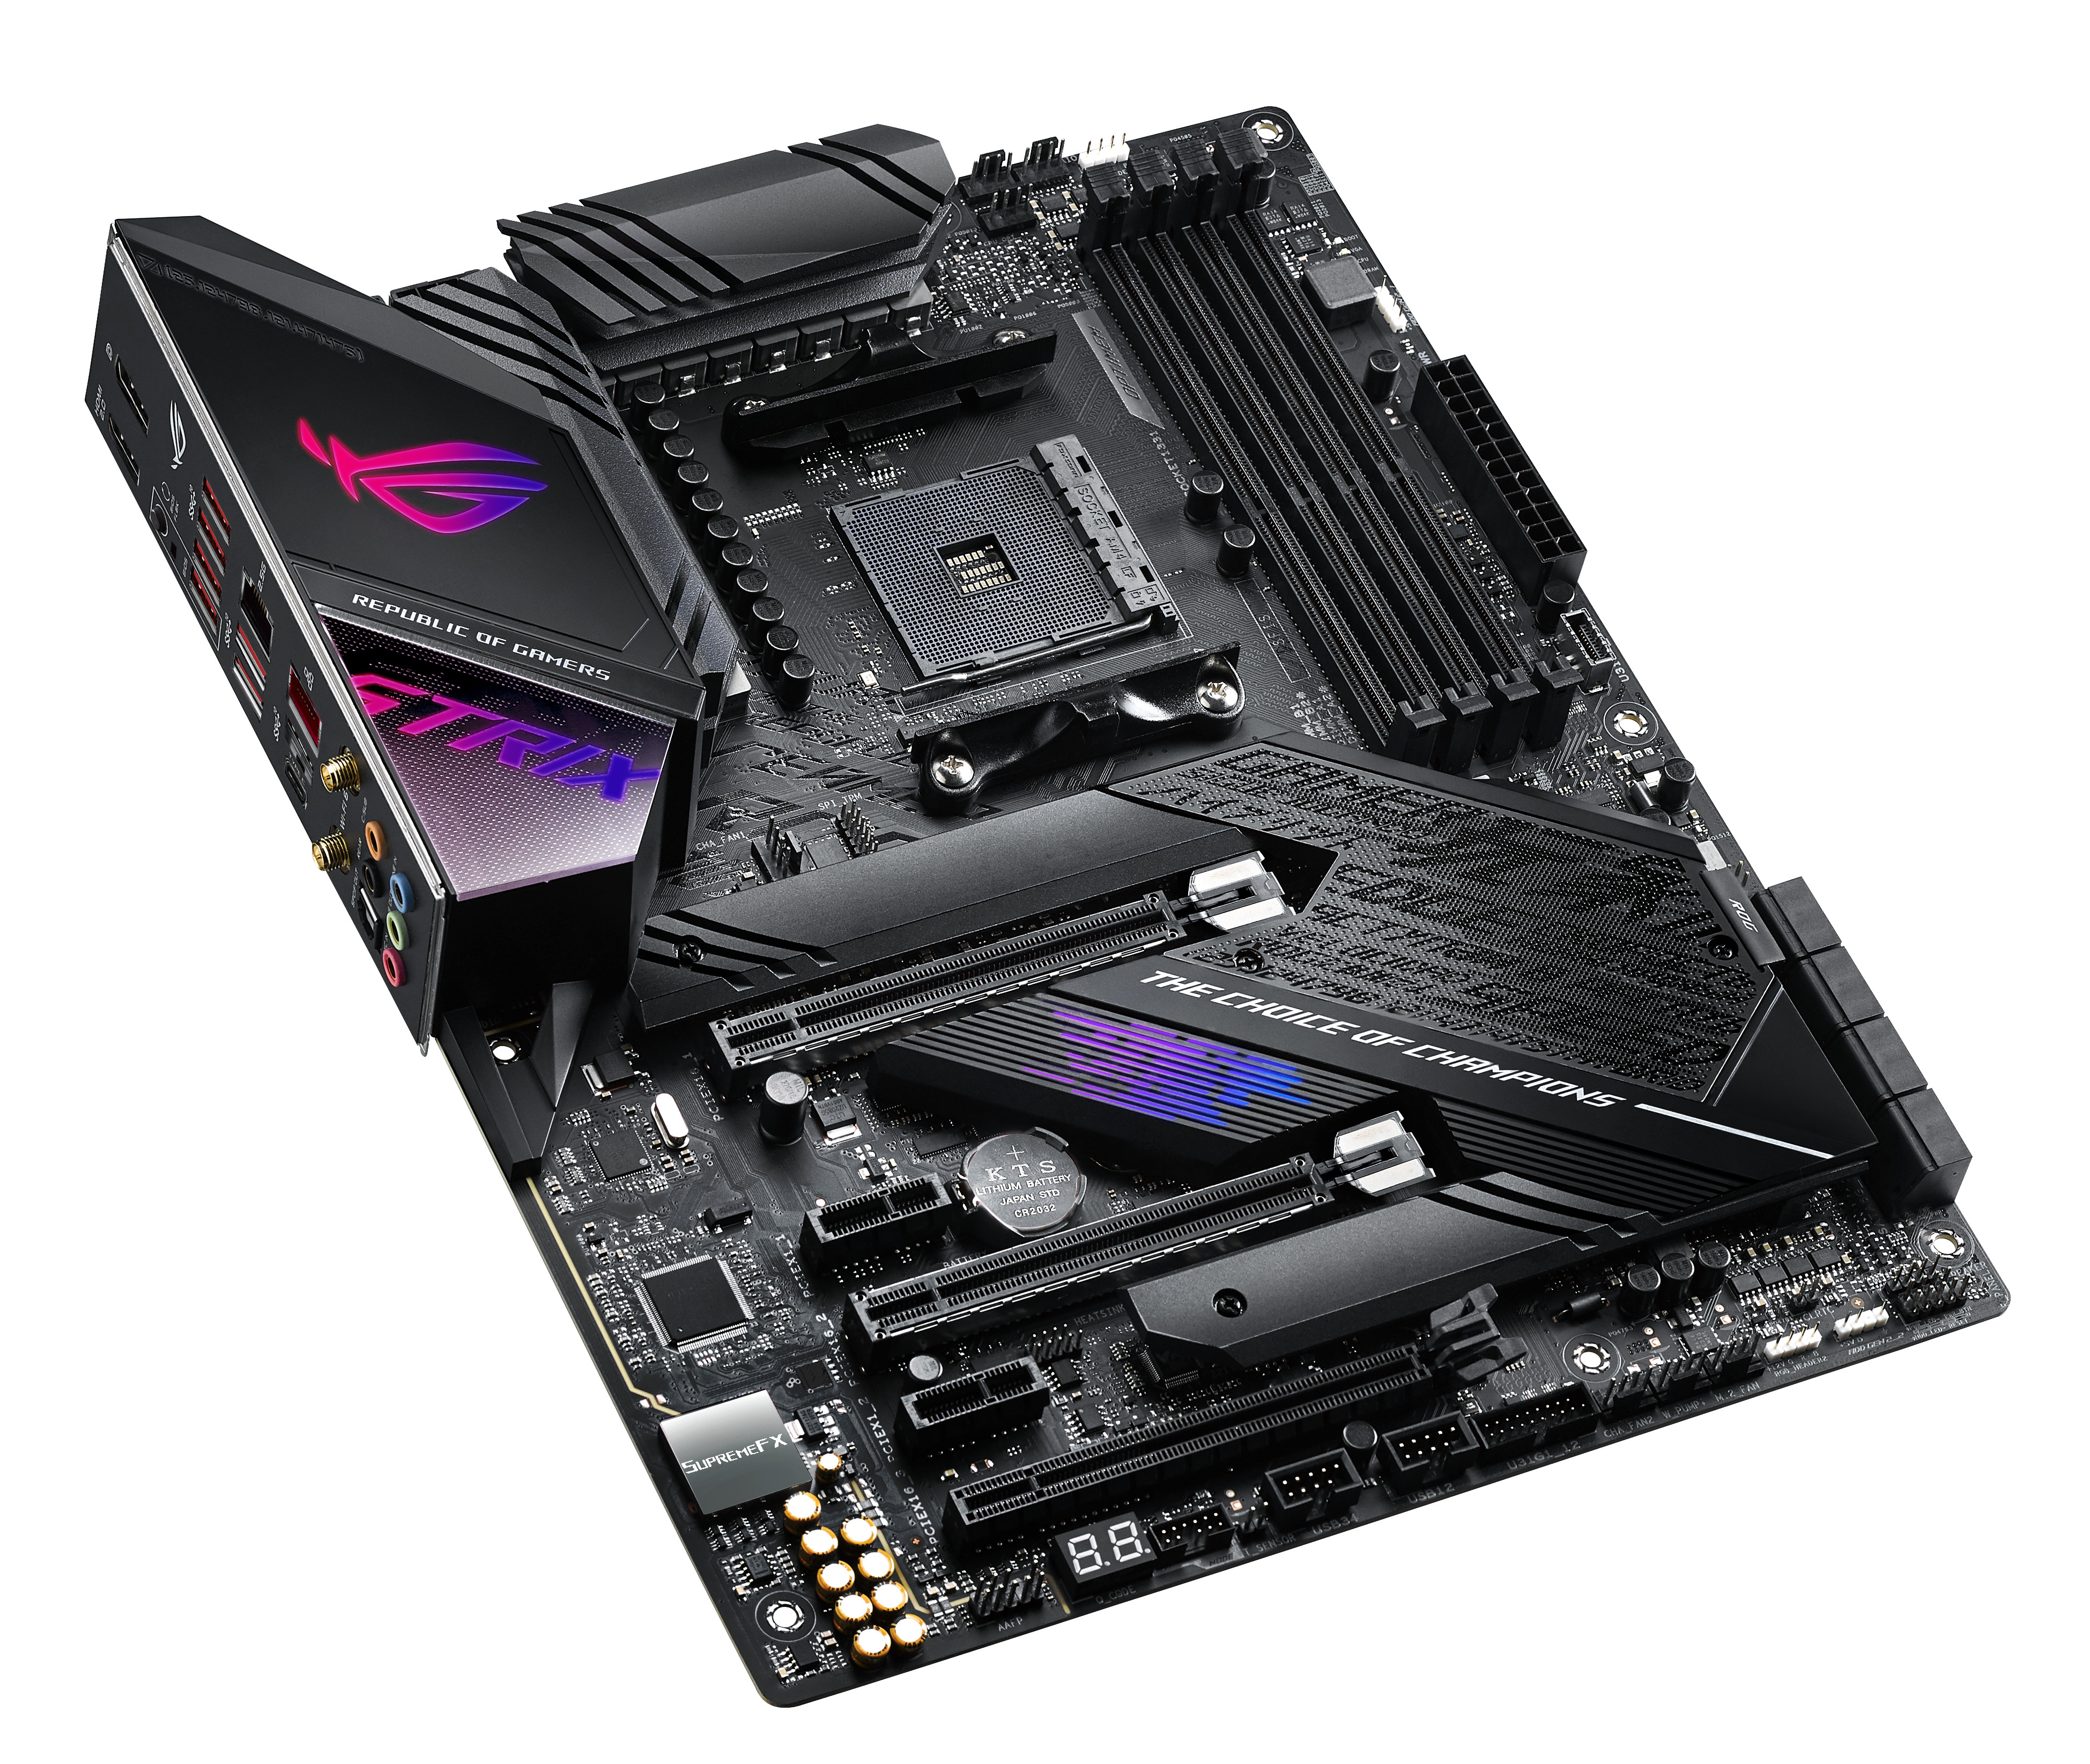 Asus Rog Strix X570 E Gaming The Amd X570 Motherboard Overview Over 35 Motherboards Analyzed